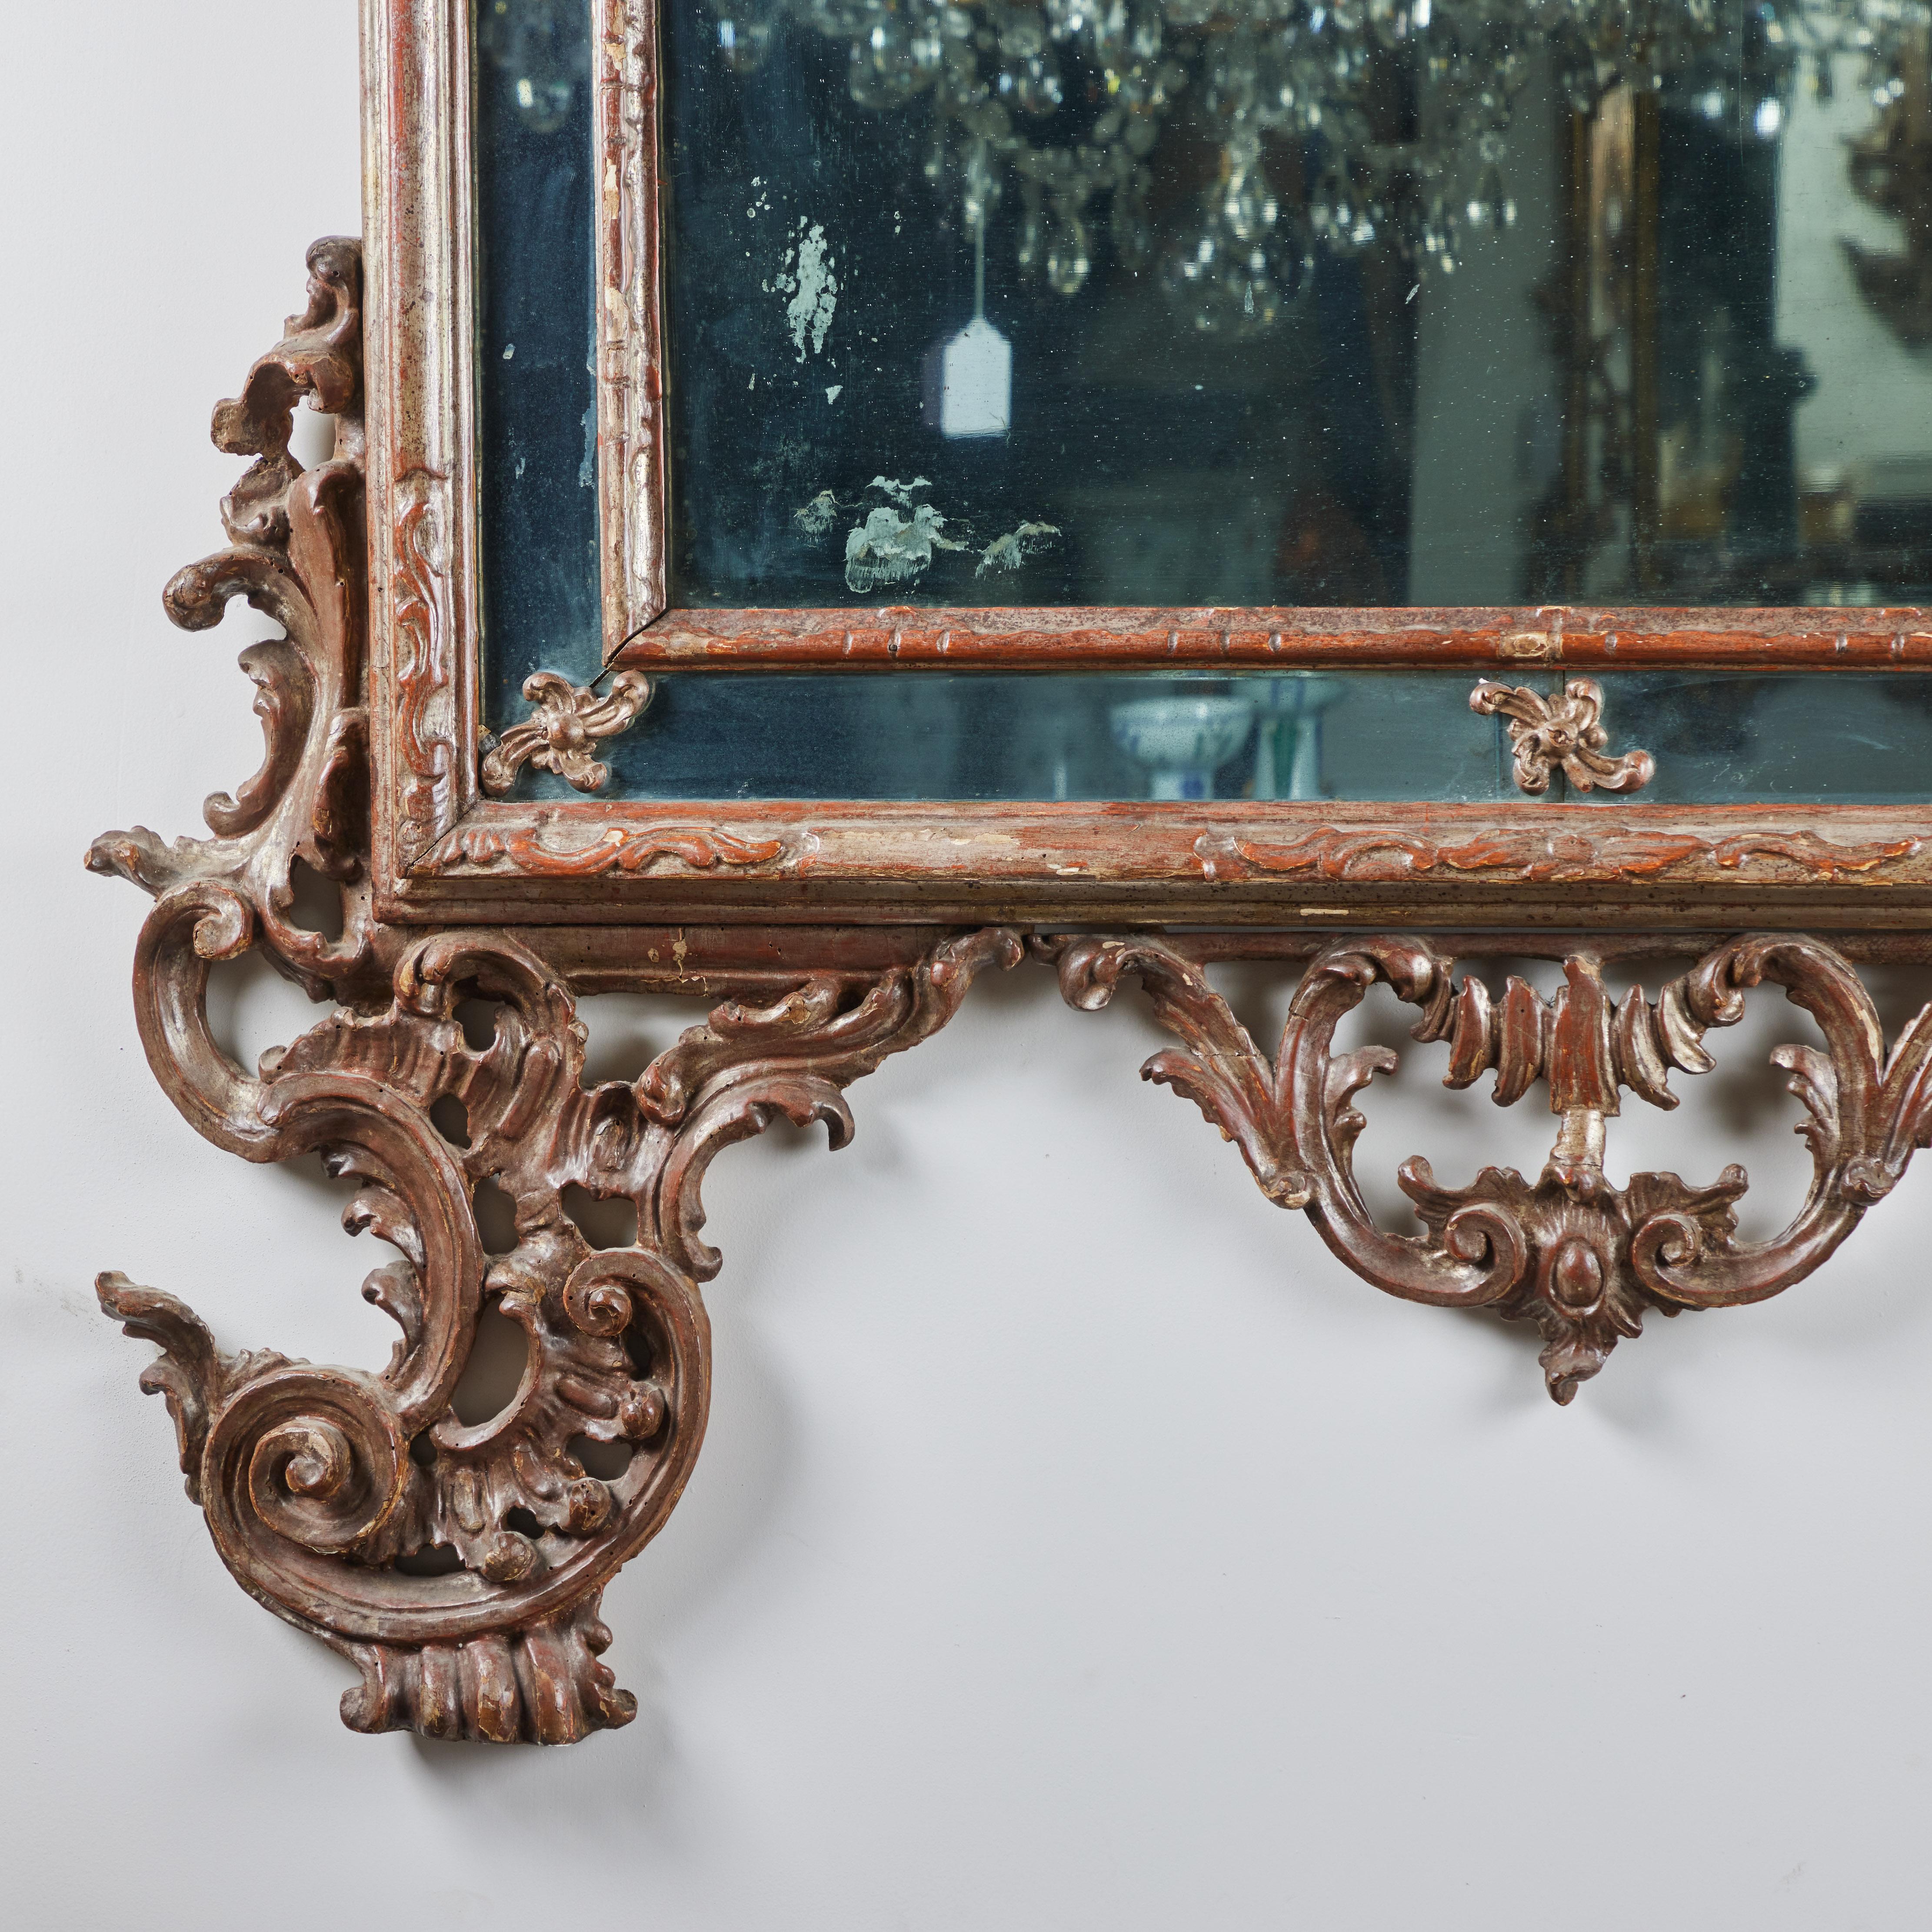 Beautiful Venetian,  hand carved, gessoed and silver gilded framed mirror.   Pediment curves out at top.  Original mirror glass is age appropriately mottled.  
